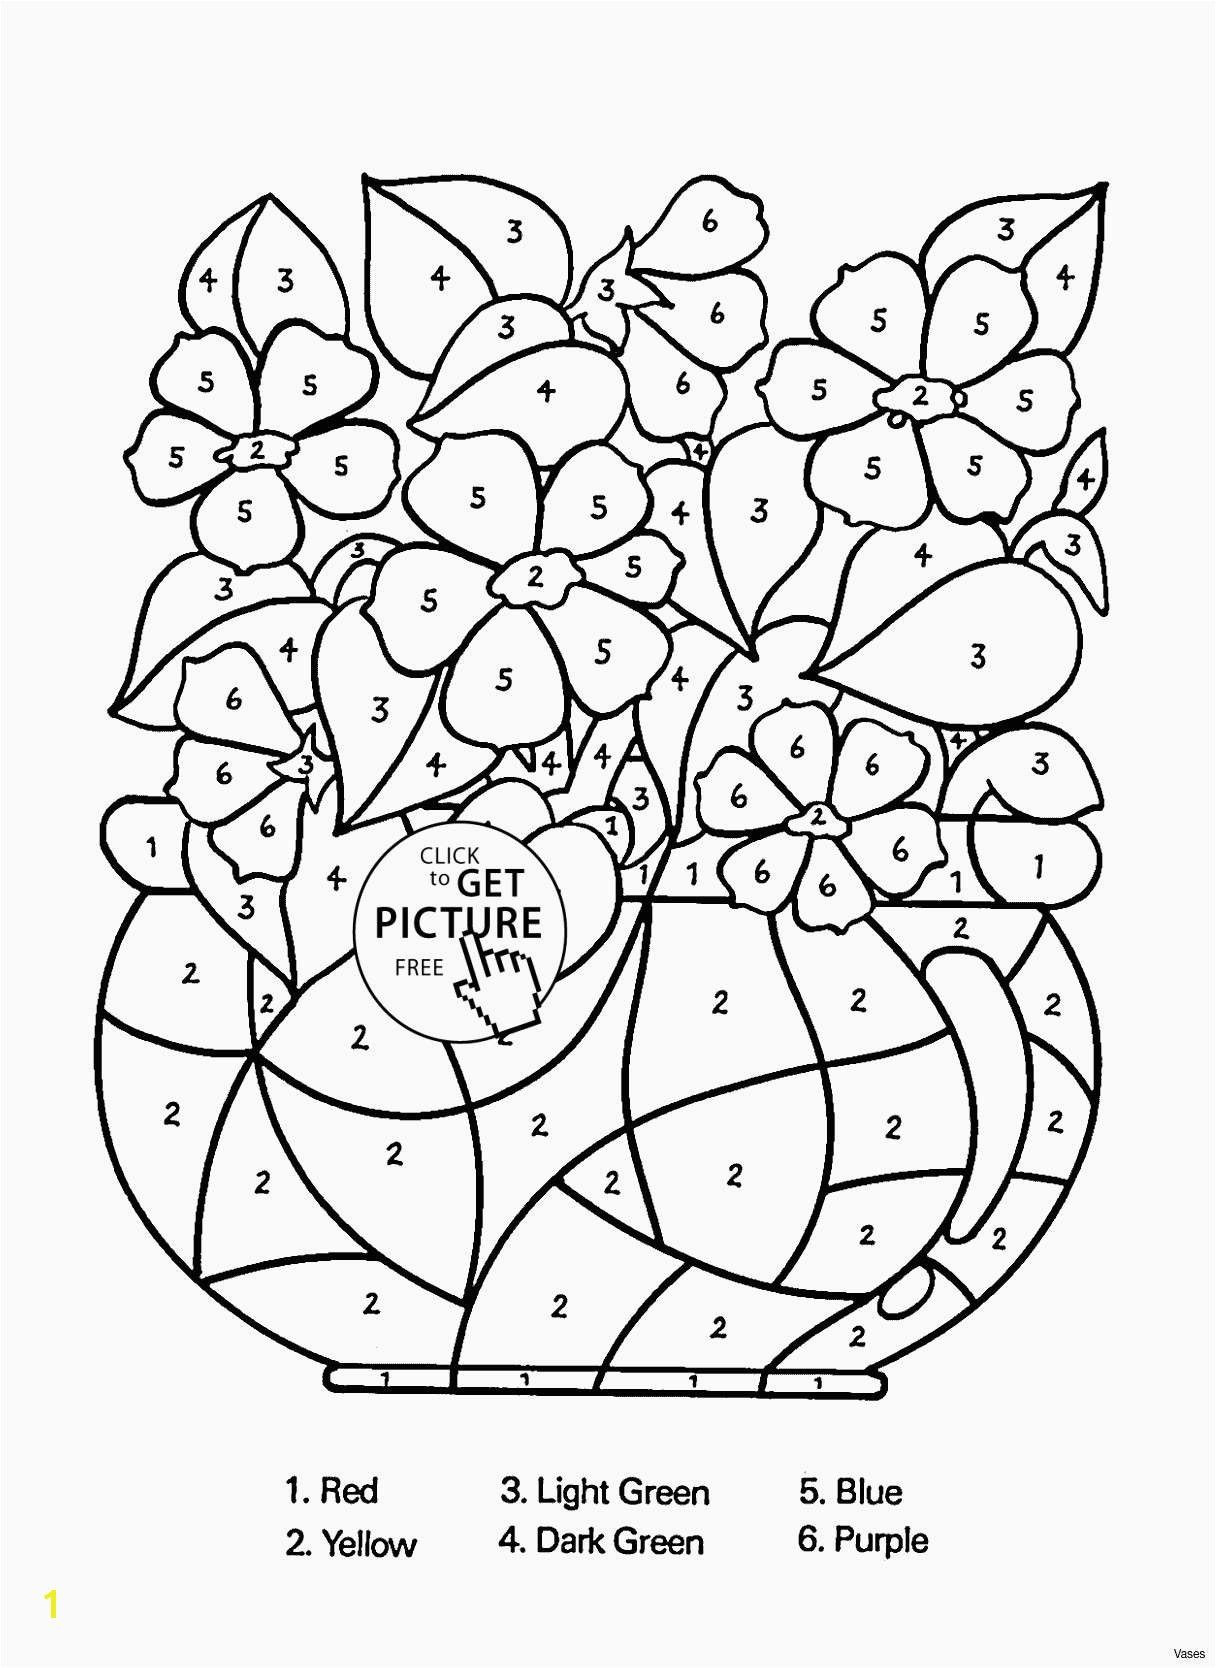 Turnip Coloring Page Celery Plant Coloring Page Awesome Coloring Pages Find Coloring